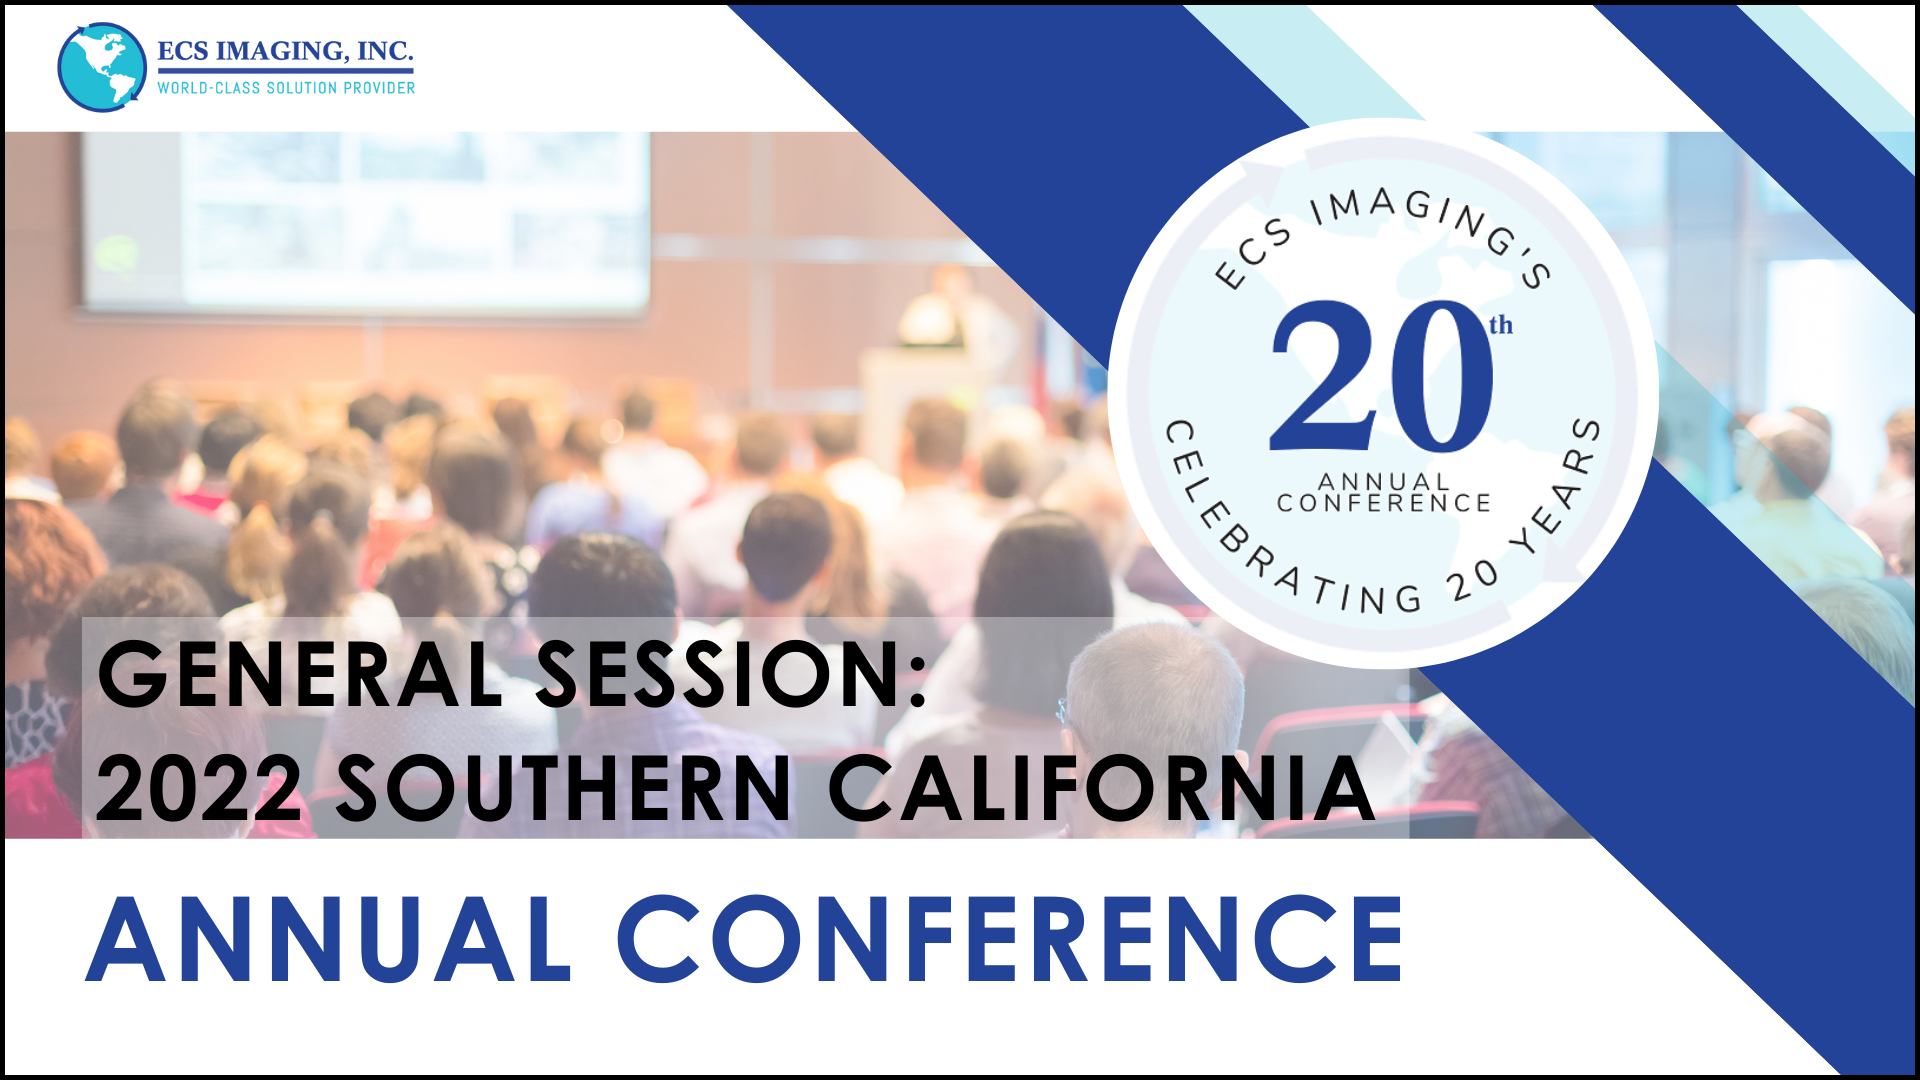 2022 Southern California Annual Conference Poster